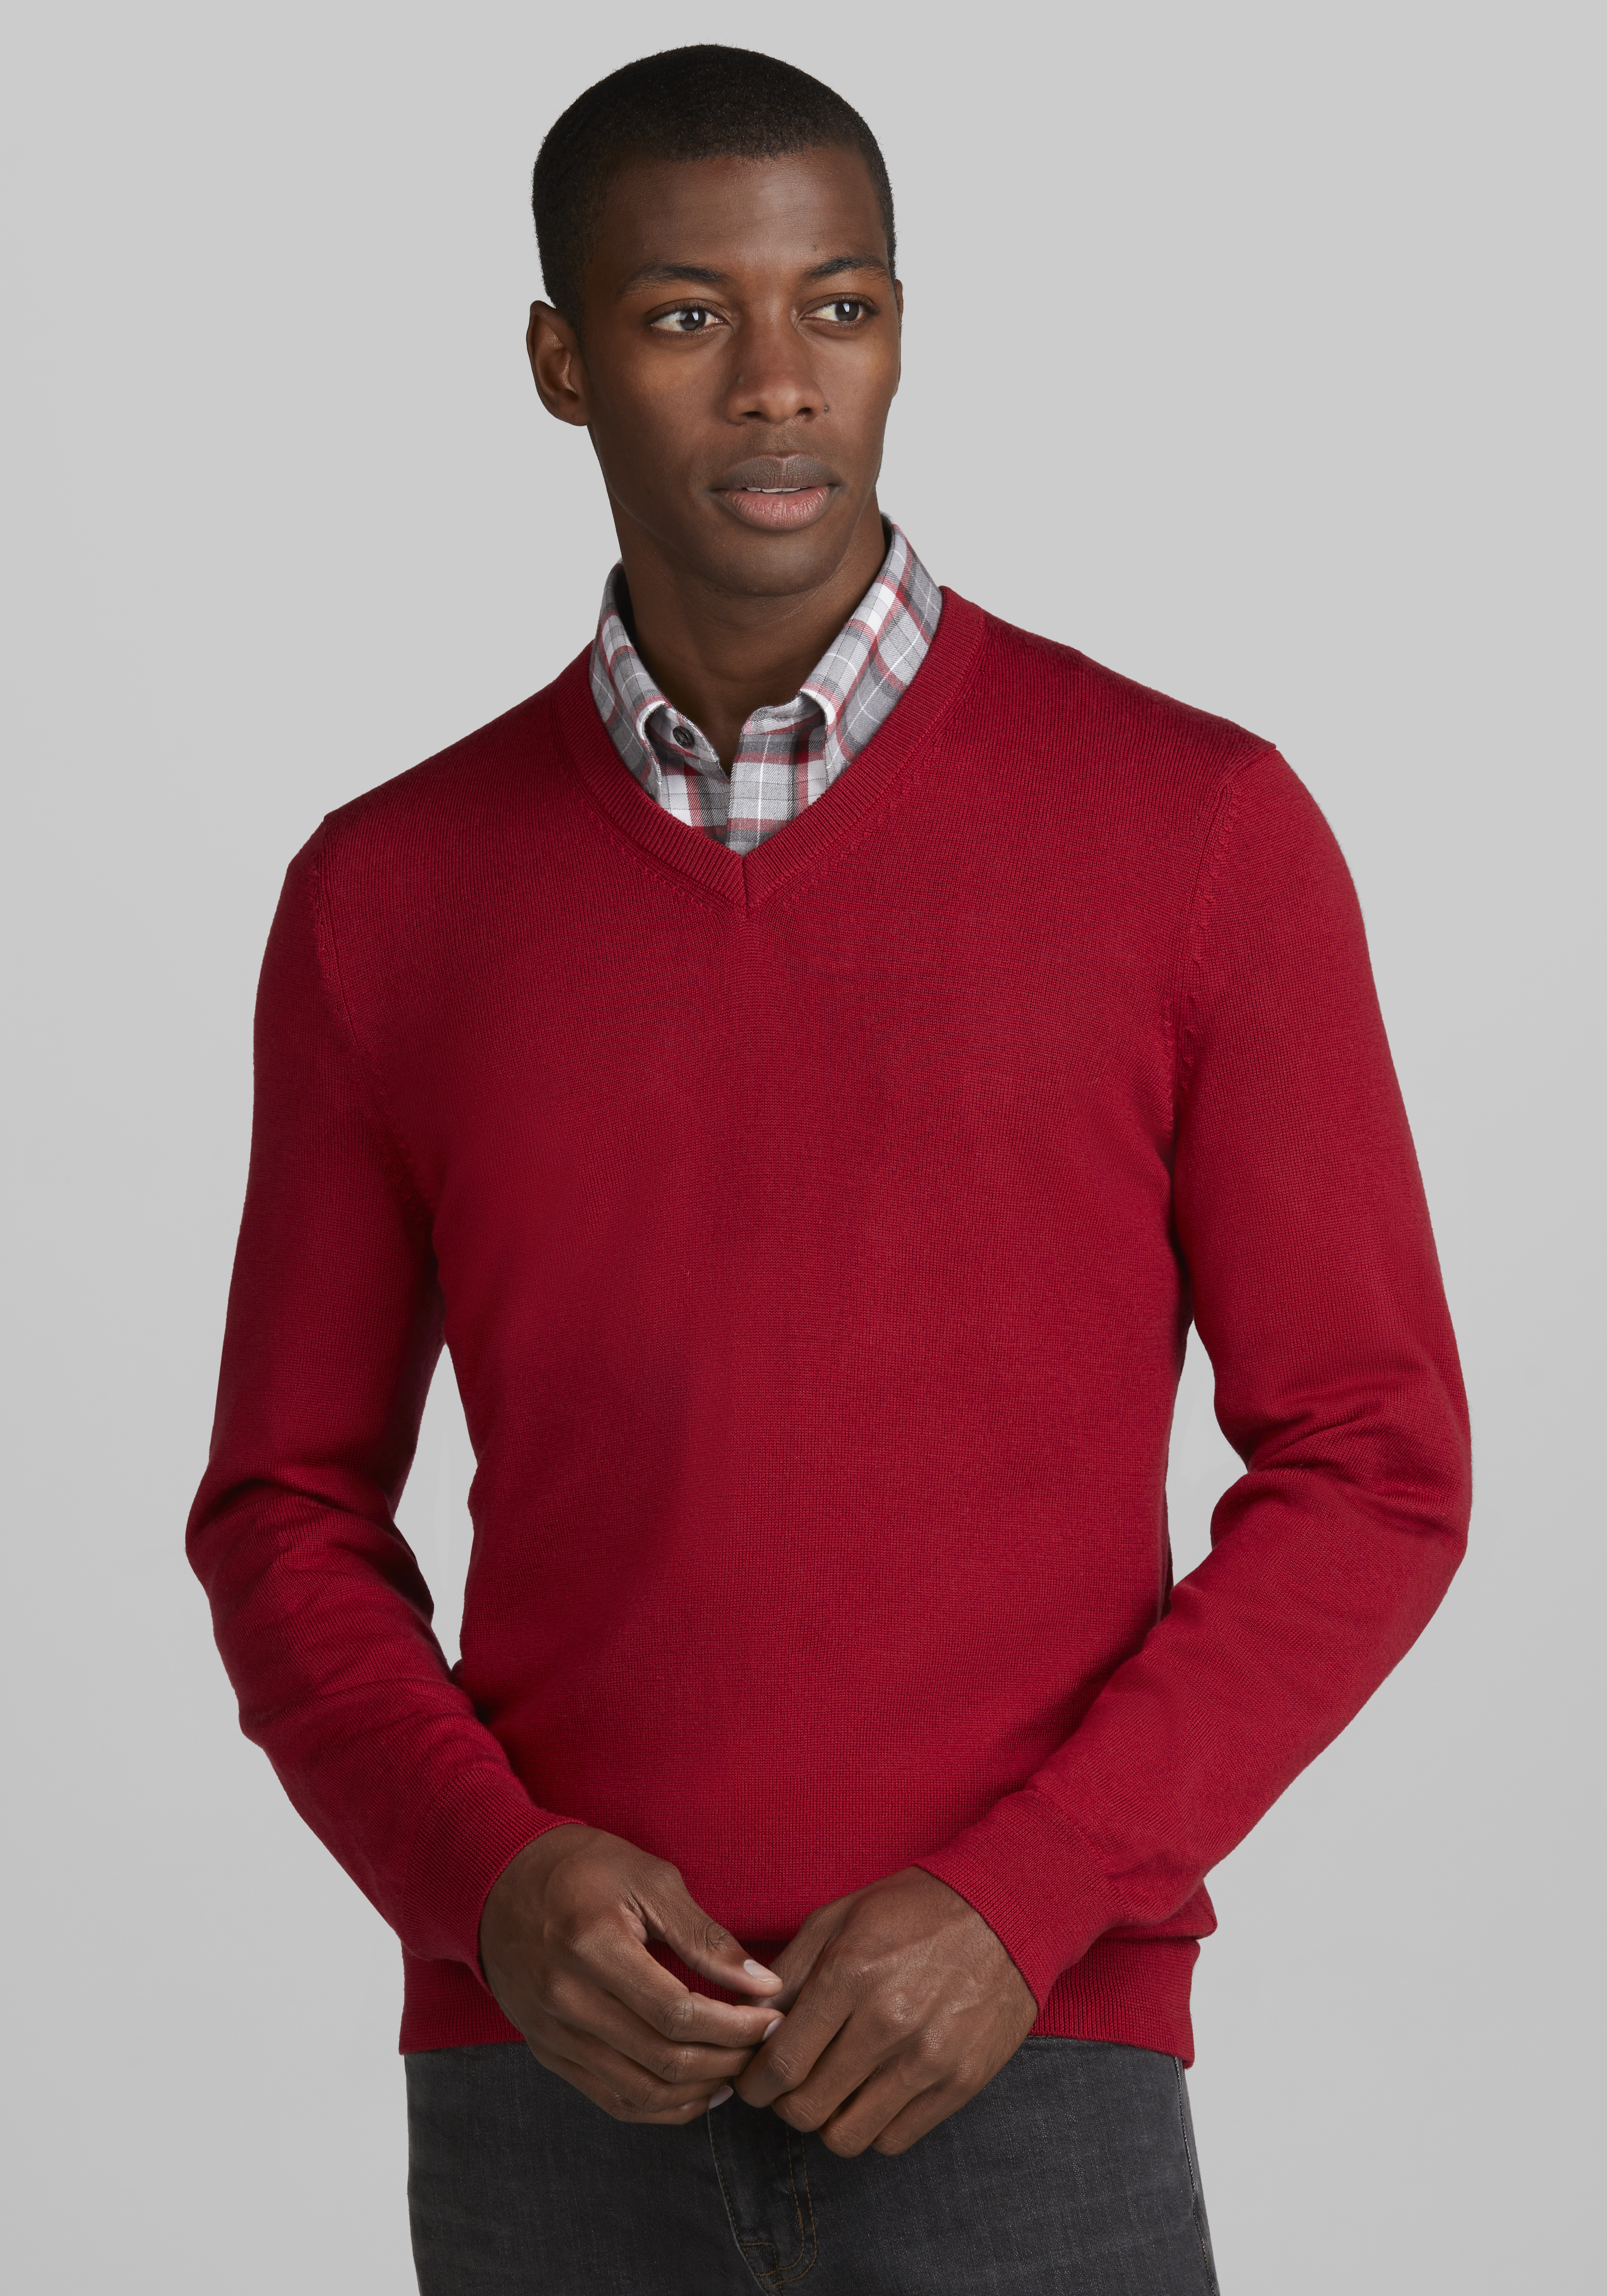 Shop Men's Clearance Sweaters & Cardigans | JoS. A. Bank